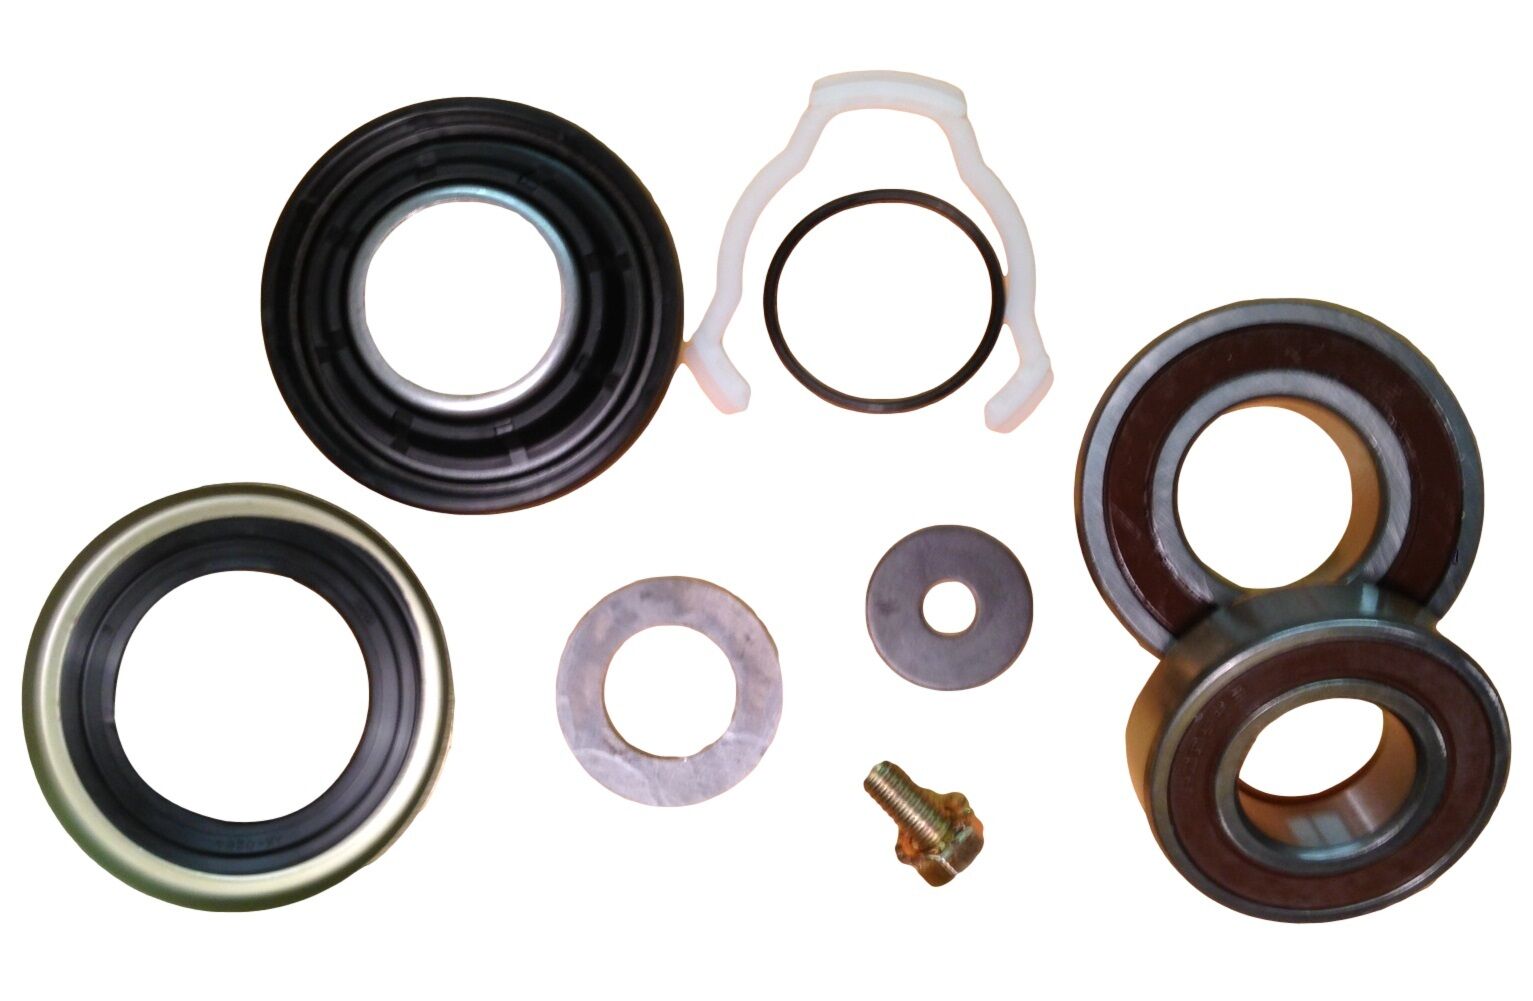 Maytag Neptune Washer Front Loader (2) Bearing, Seal and Washer Kit 12002022 